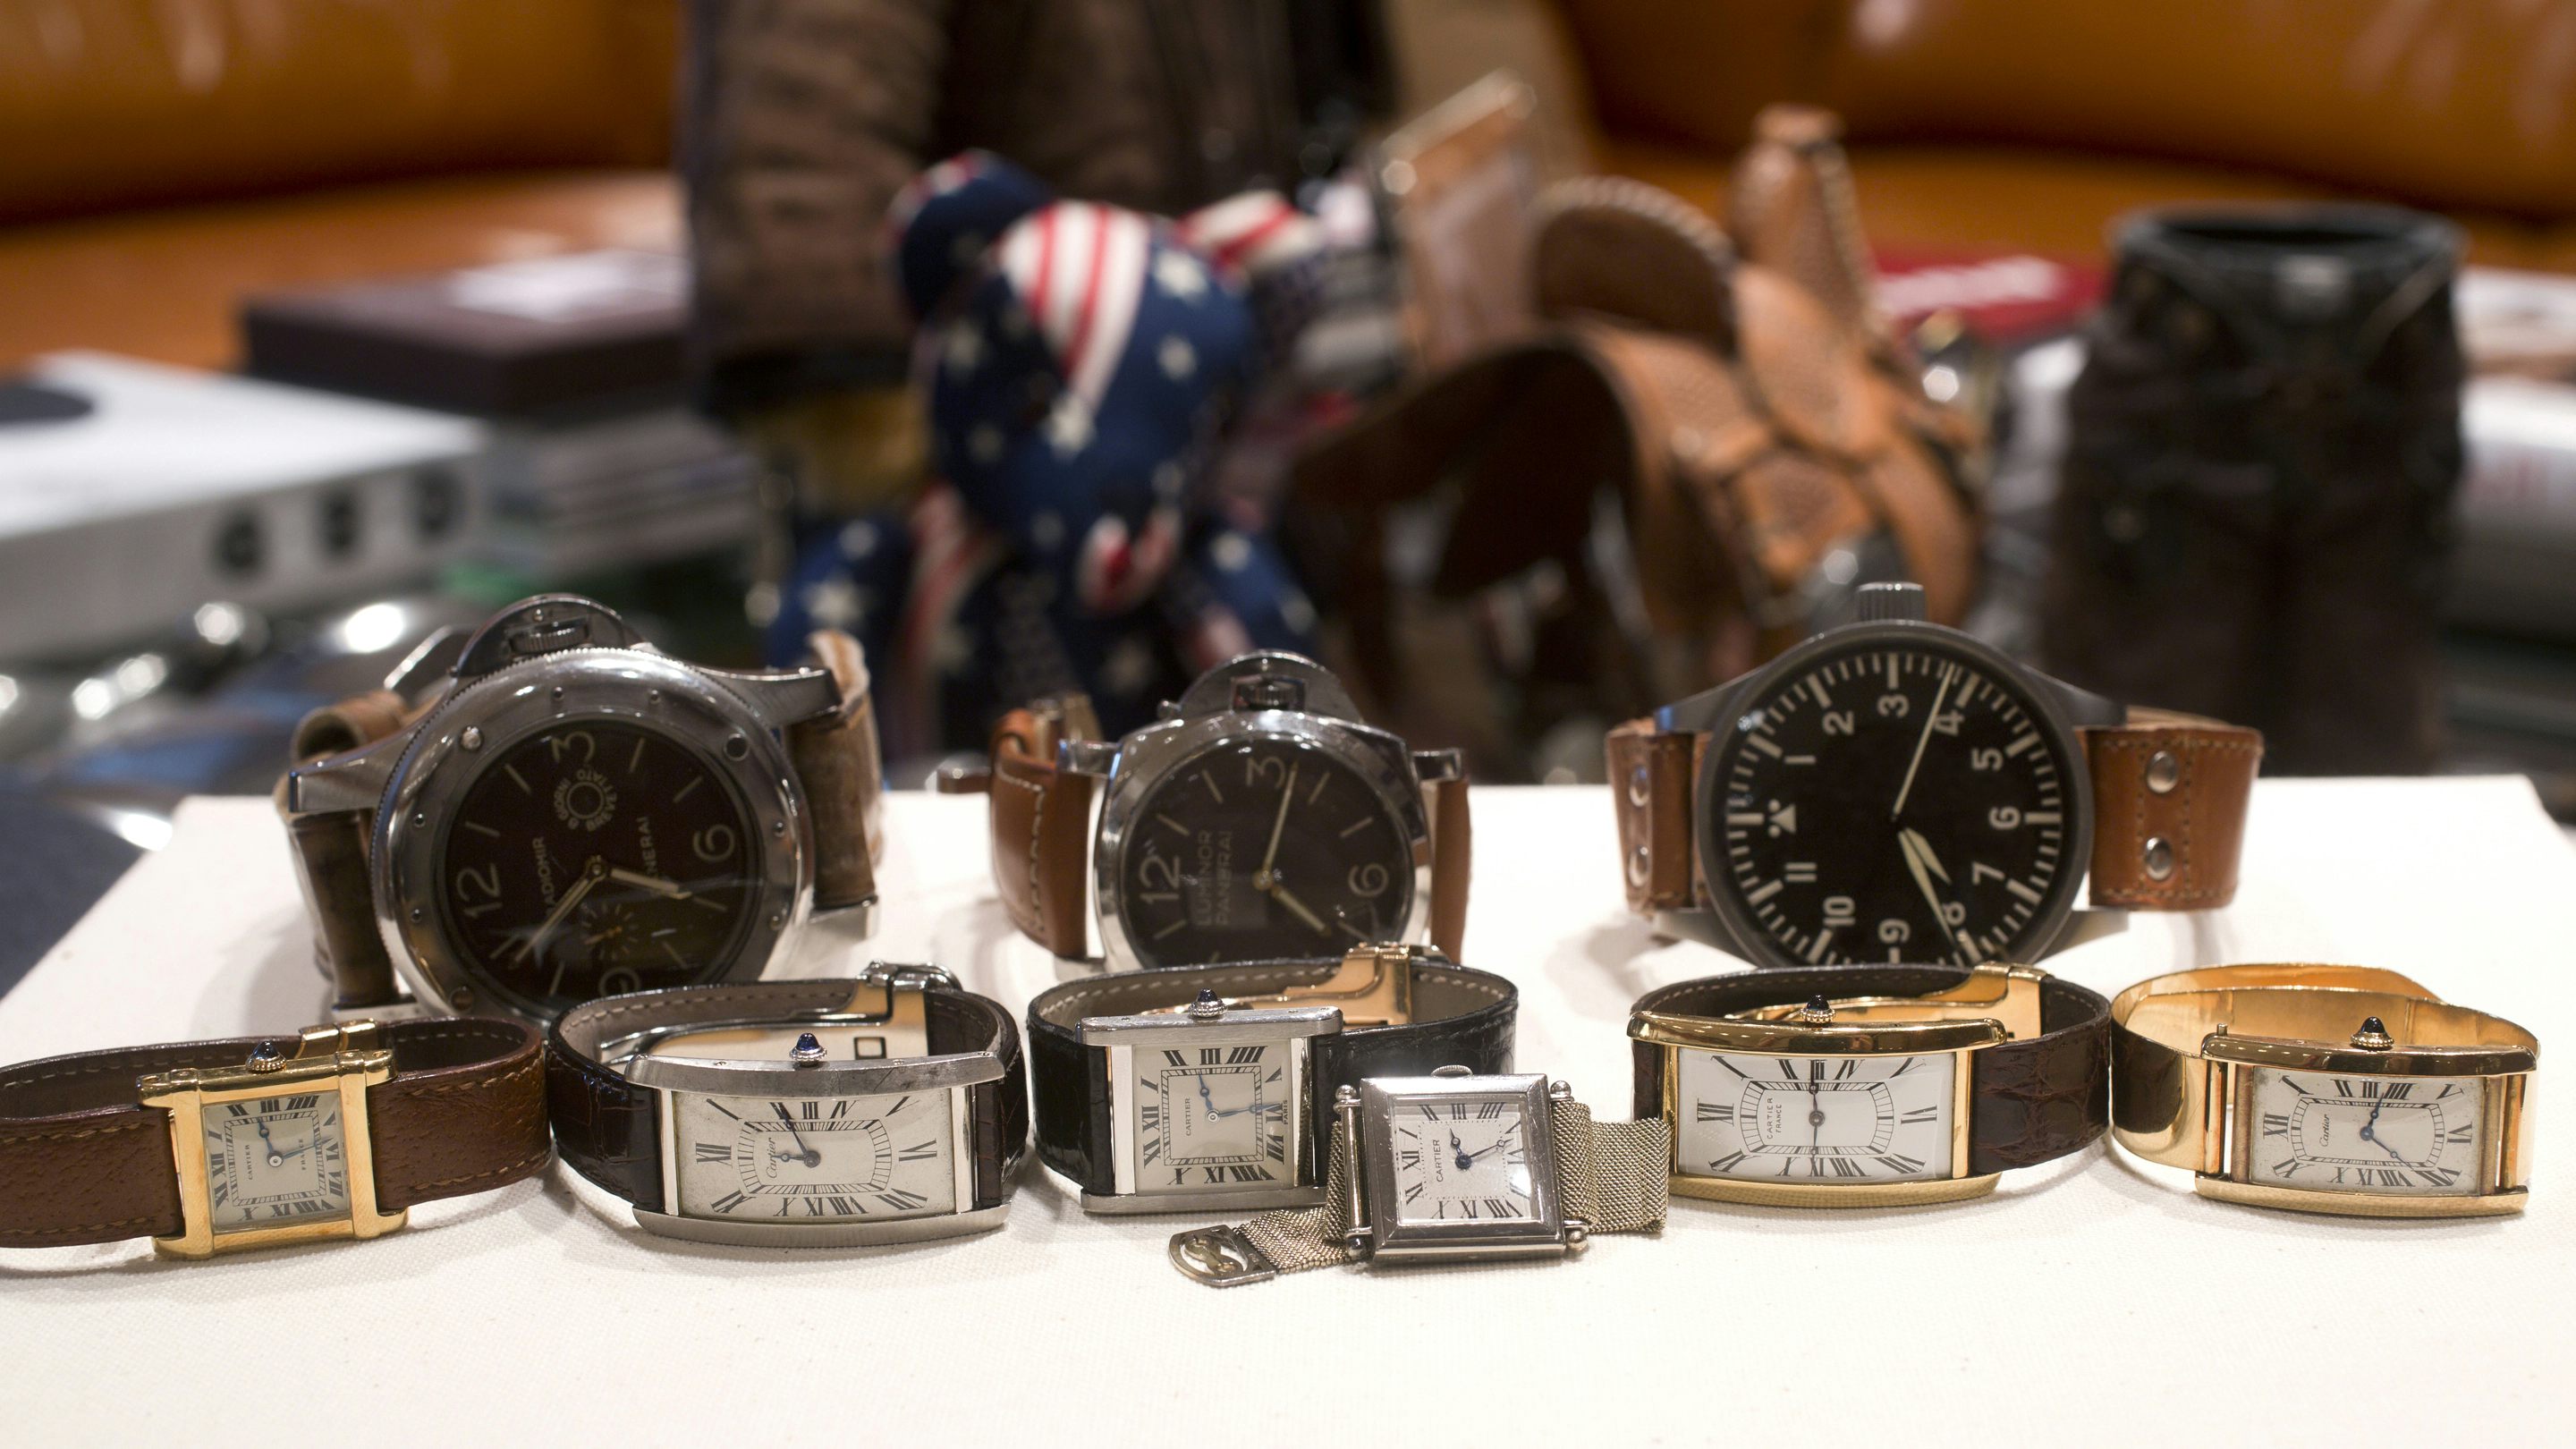 Interview: A Look Inside The Personal Watch Collection Of Ralph